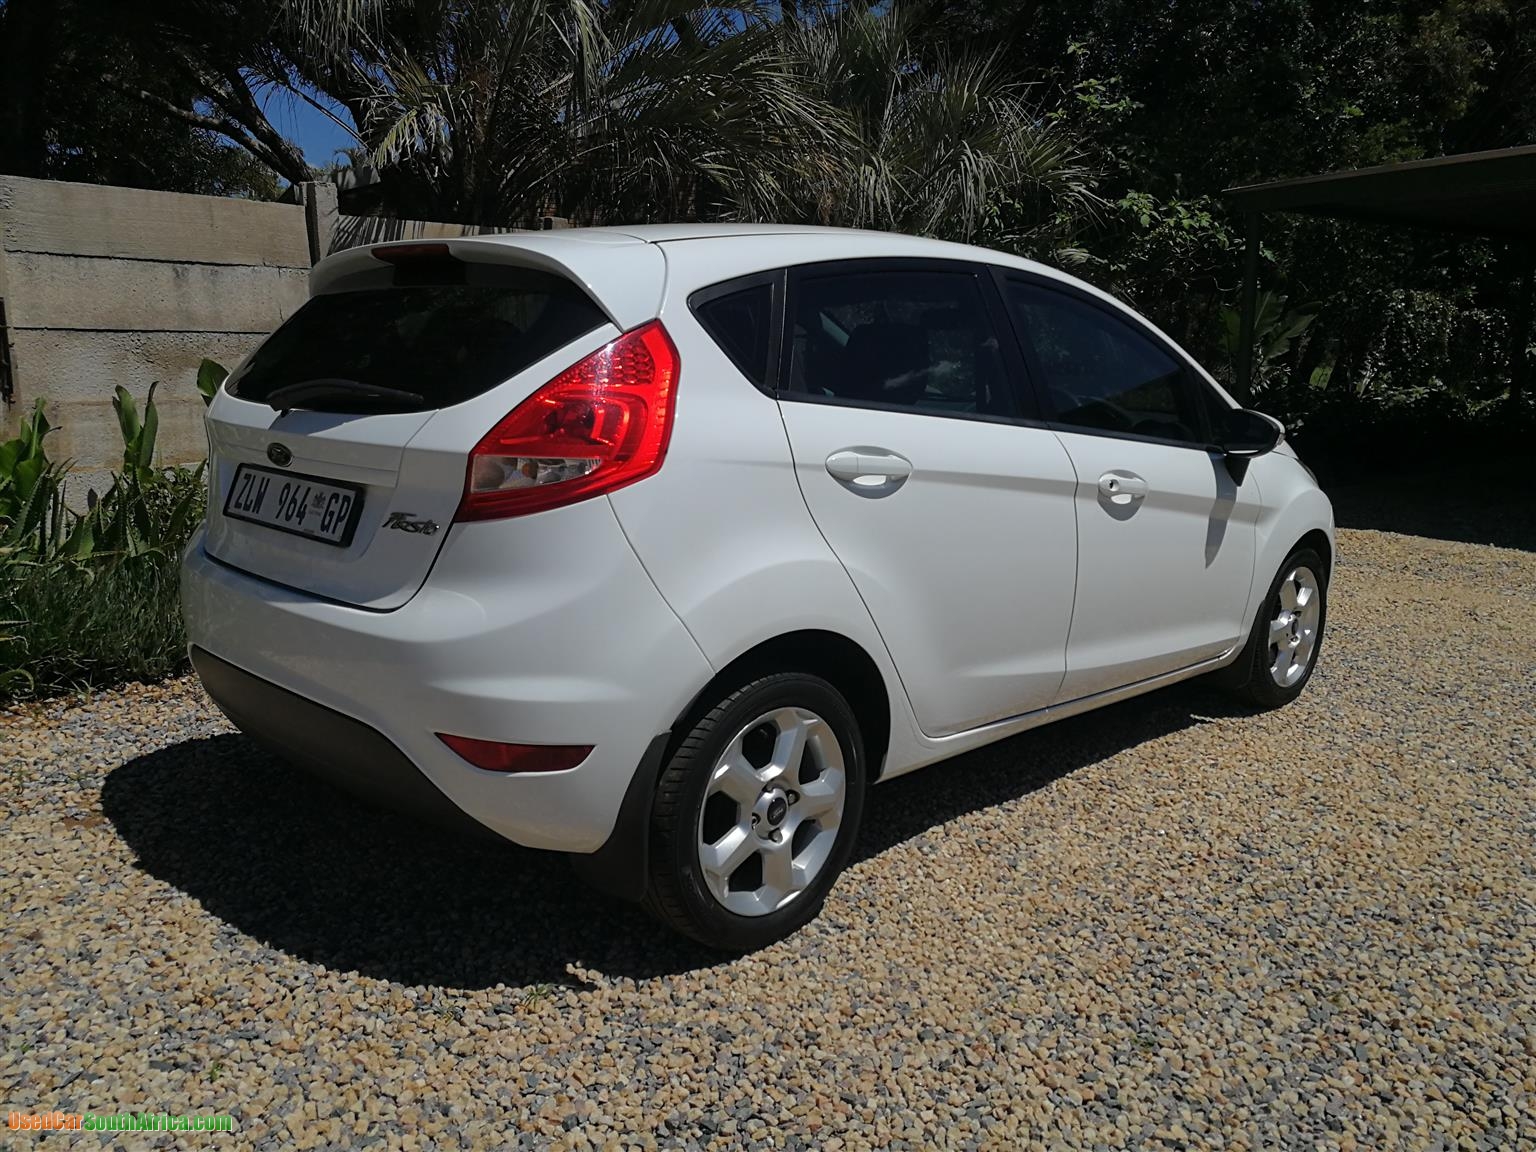 2010 Ford Fiesta R45,000 only used car for sale in Boksburg Gauteng